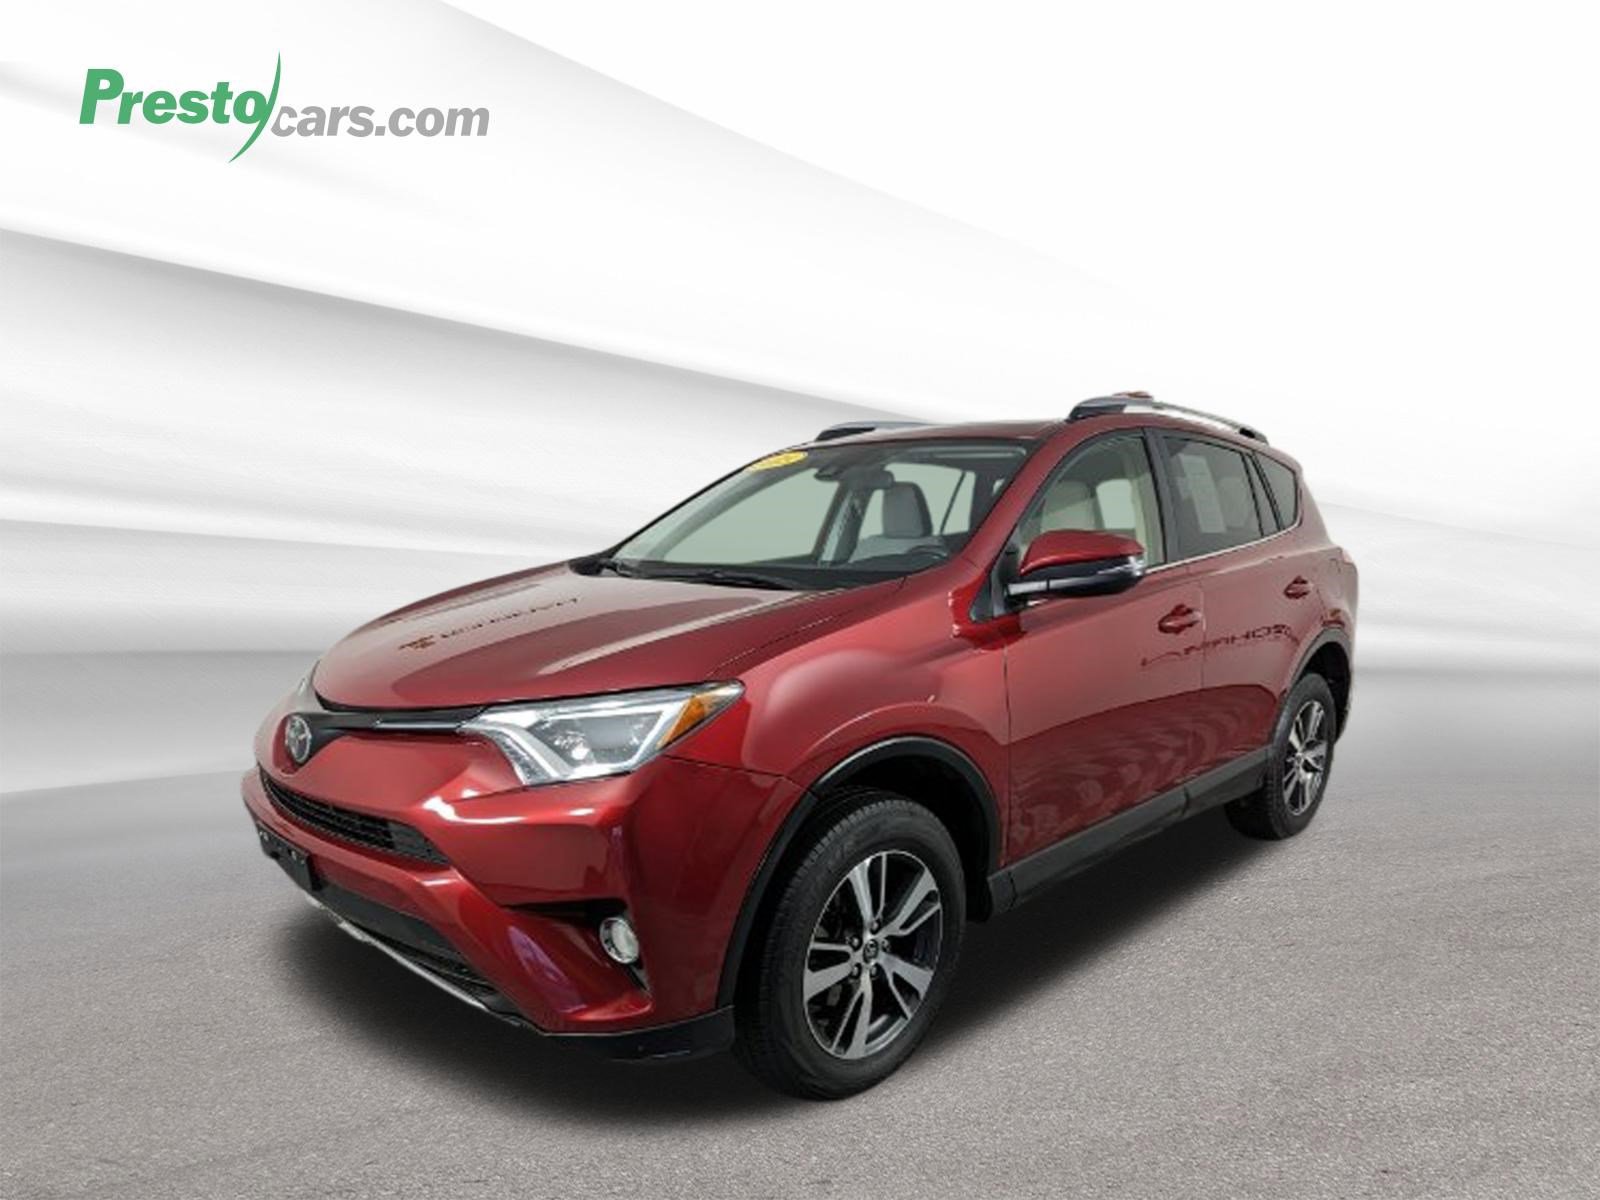 Used 2018 Toyota RAV4 for Sale Right Now - Autotrader